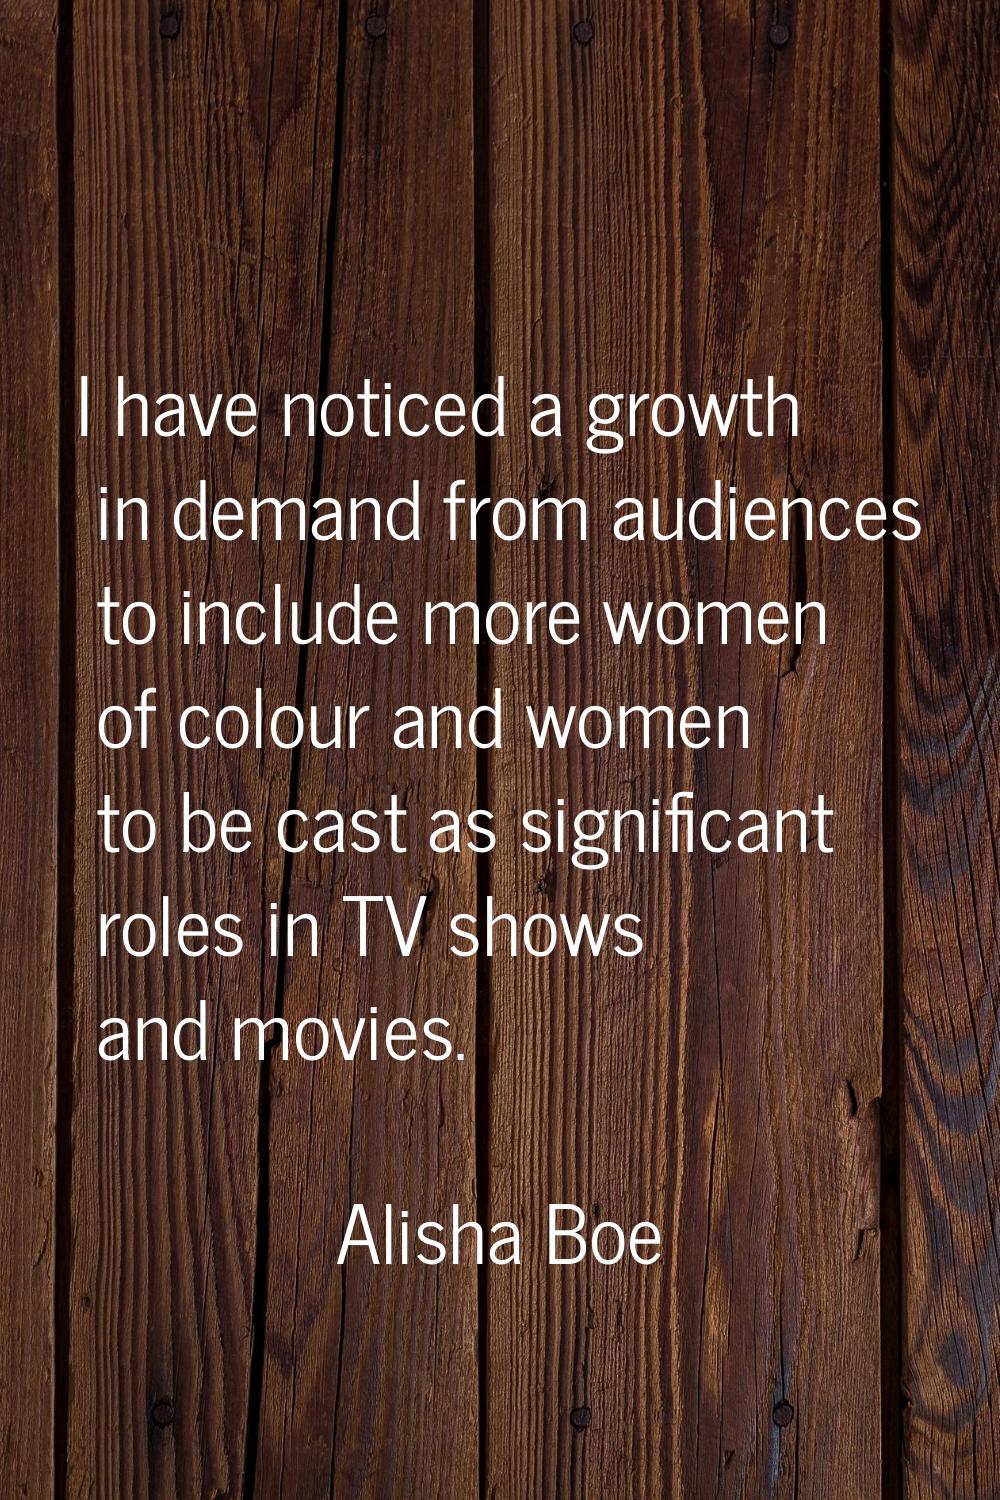 I have noticed a growth in demand from audiences to include more women of colour and women to be ca